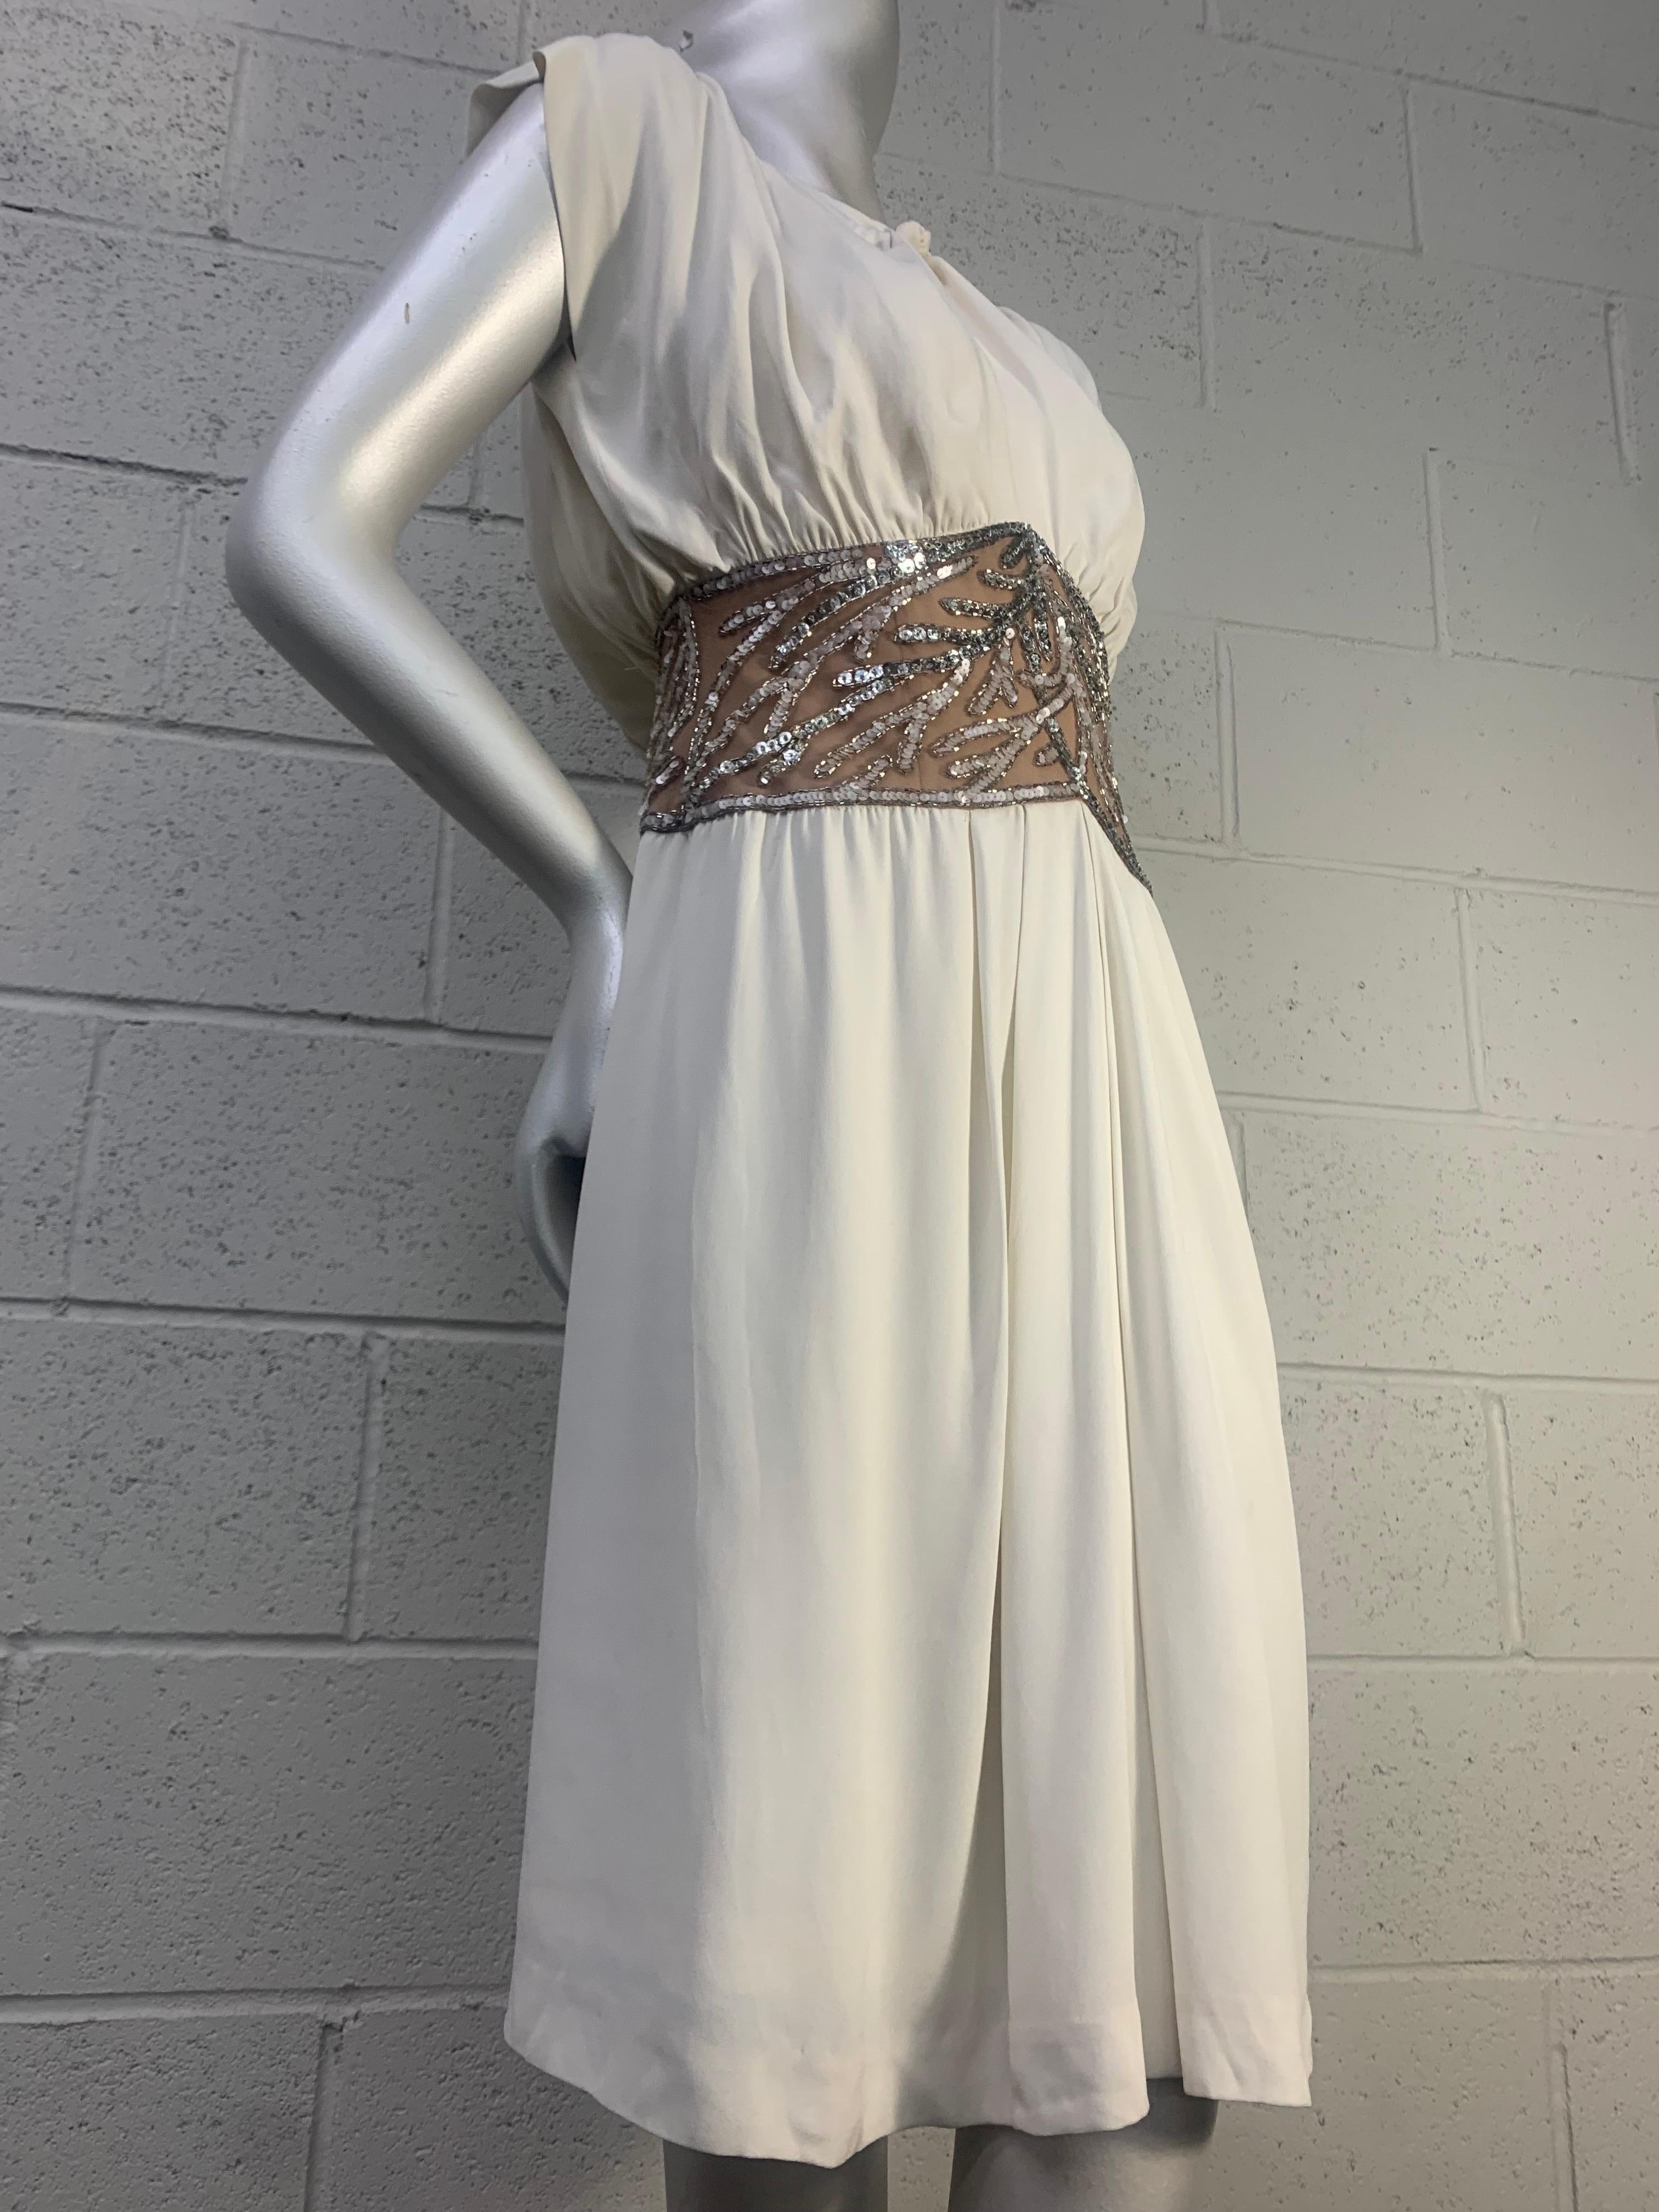 1980s Bob Mackie White Silk Crepe Cocktail Dress w Sheer Beaded Waist Panel: 1940s inspired silhouette with keyhole knotted front neckline, blouson sleeve and back. Slightly gathered skirt. Wide waist panel in sheer illusion and coral motifs in